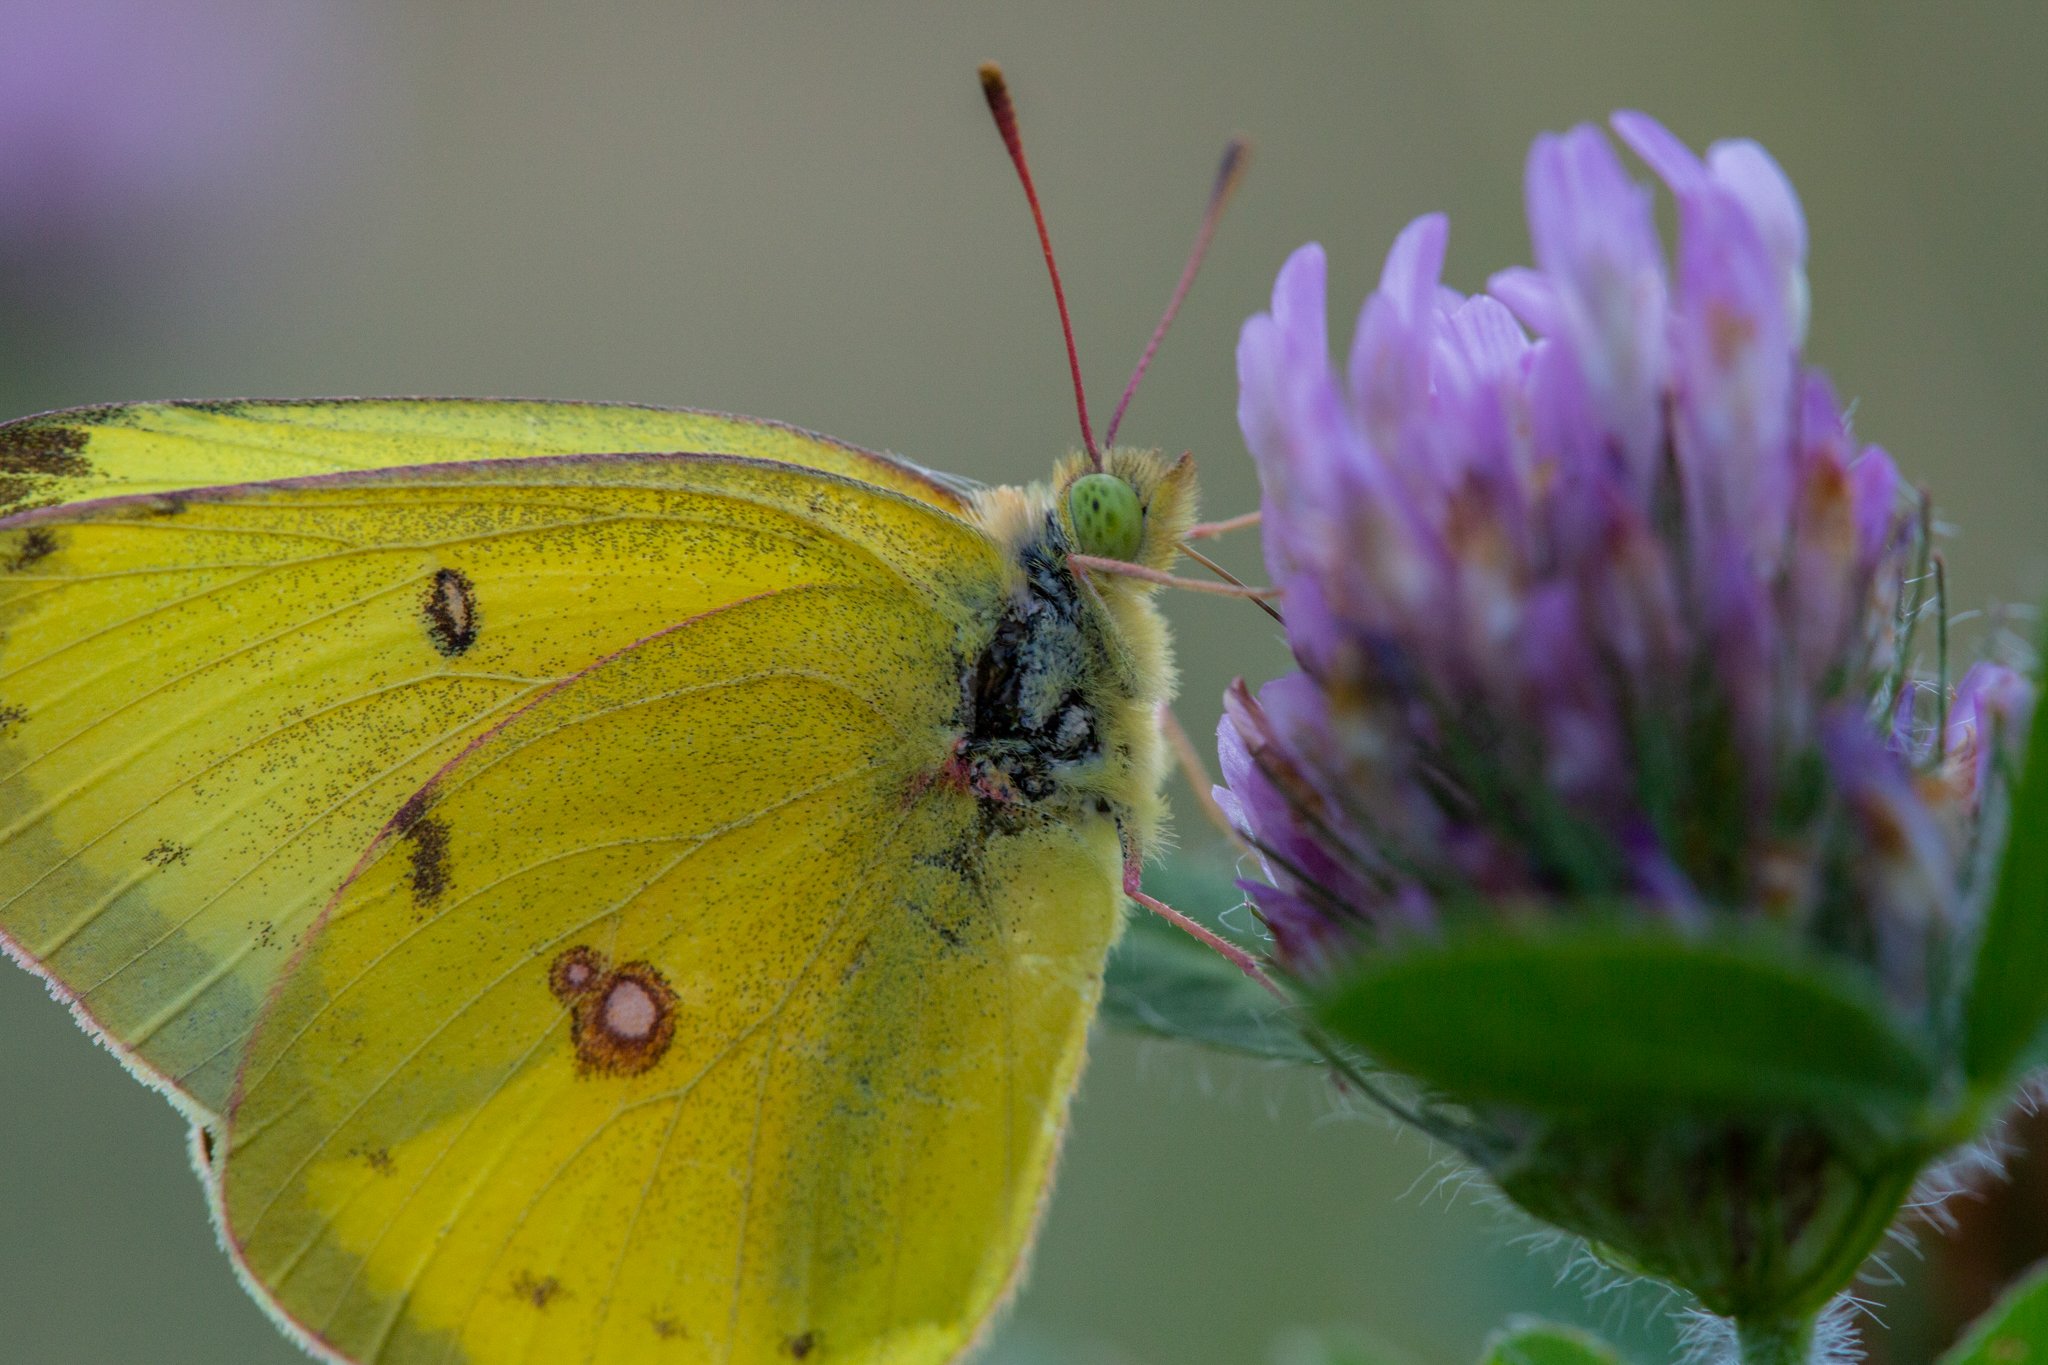  A Clouded sulphur butterfly (Colias philodice) rests on a flower. 